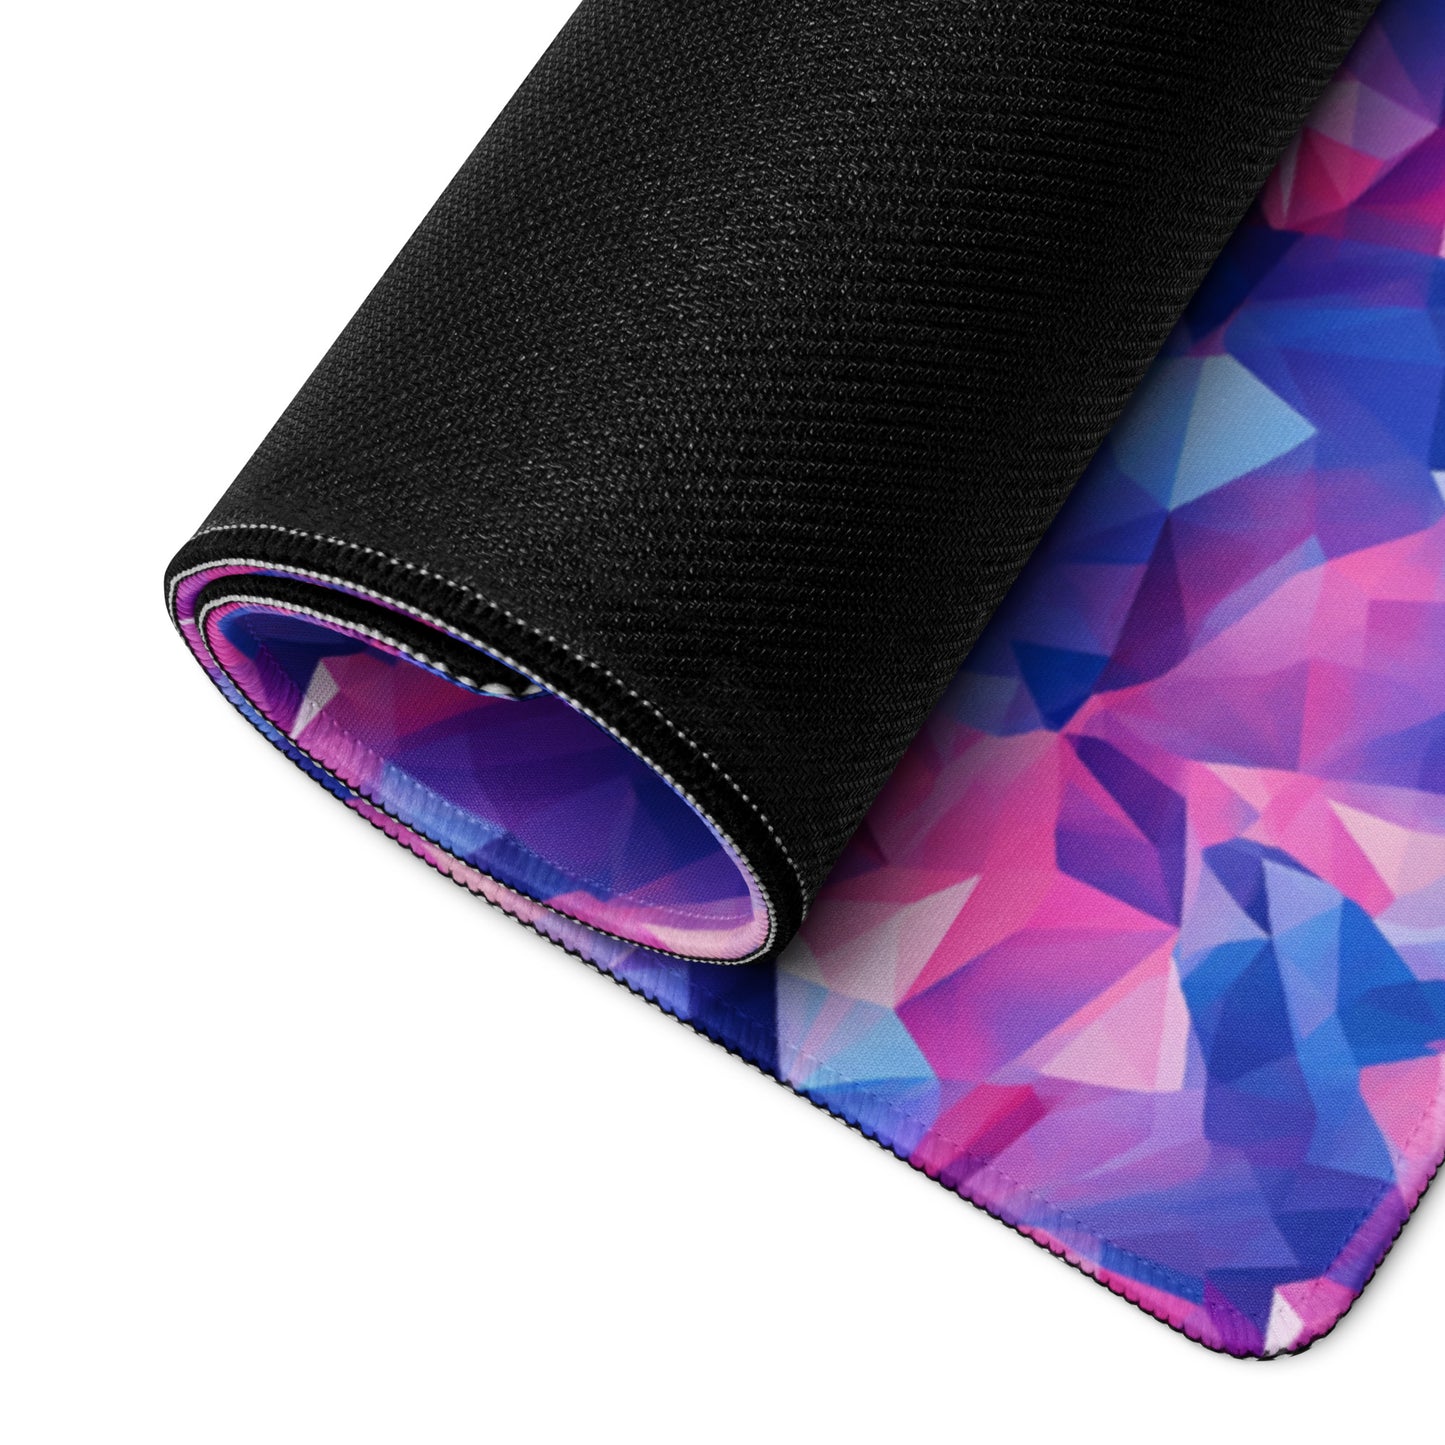 A pink and blue crystal gaming desk pad rolled up.